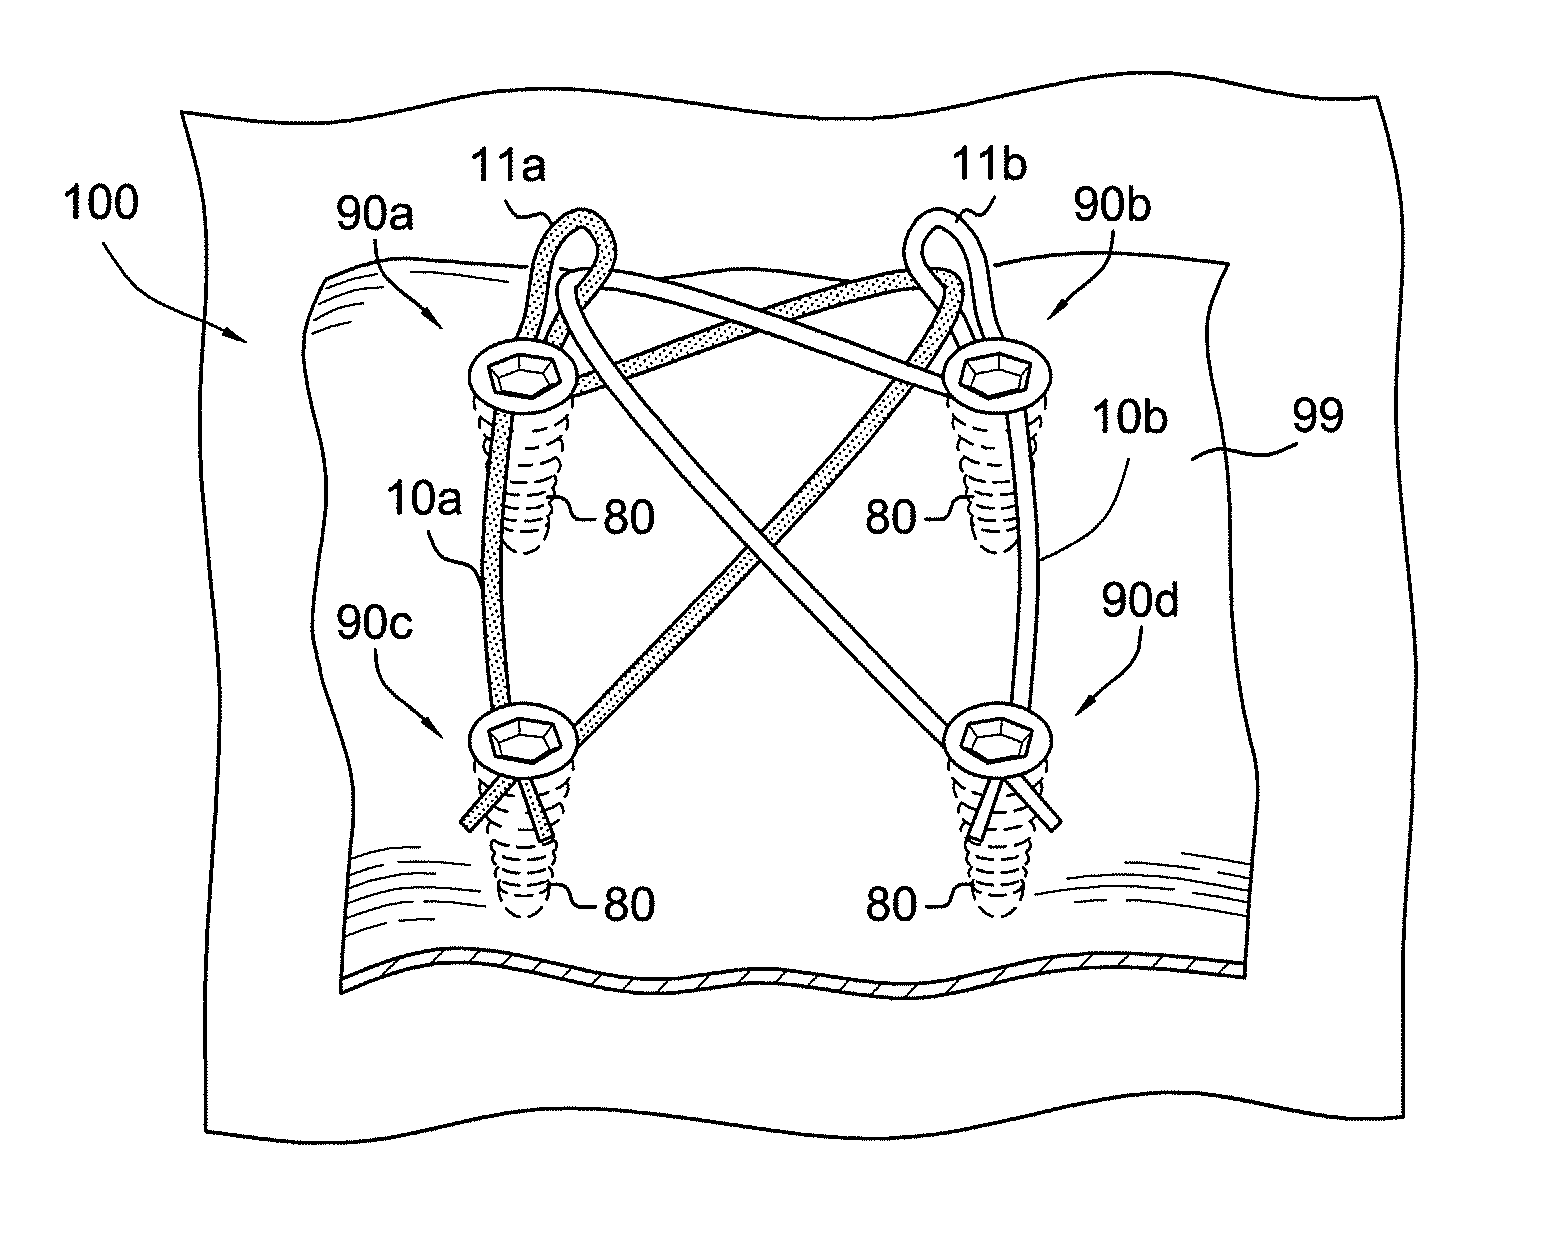 Method for creating knotless double row construct with medial row closure